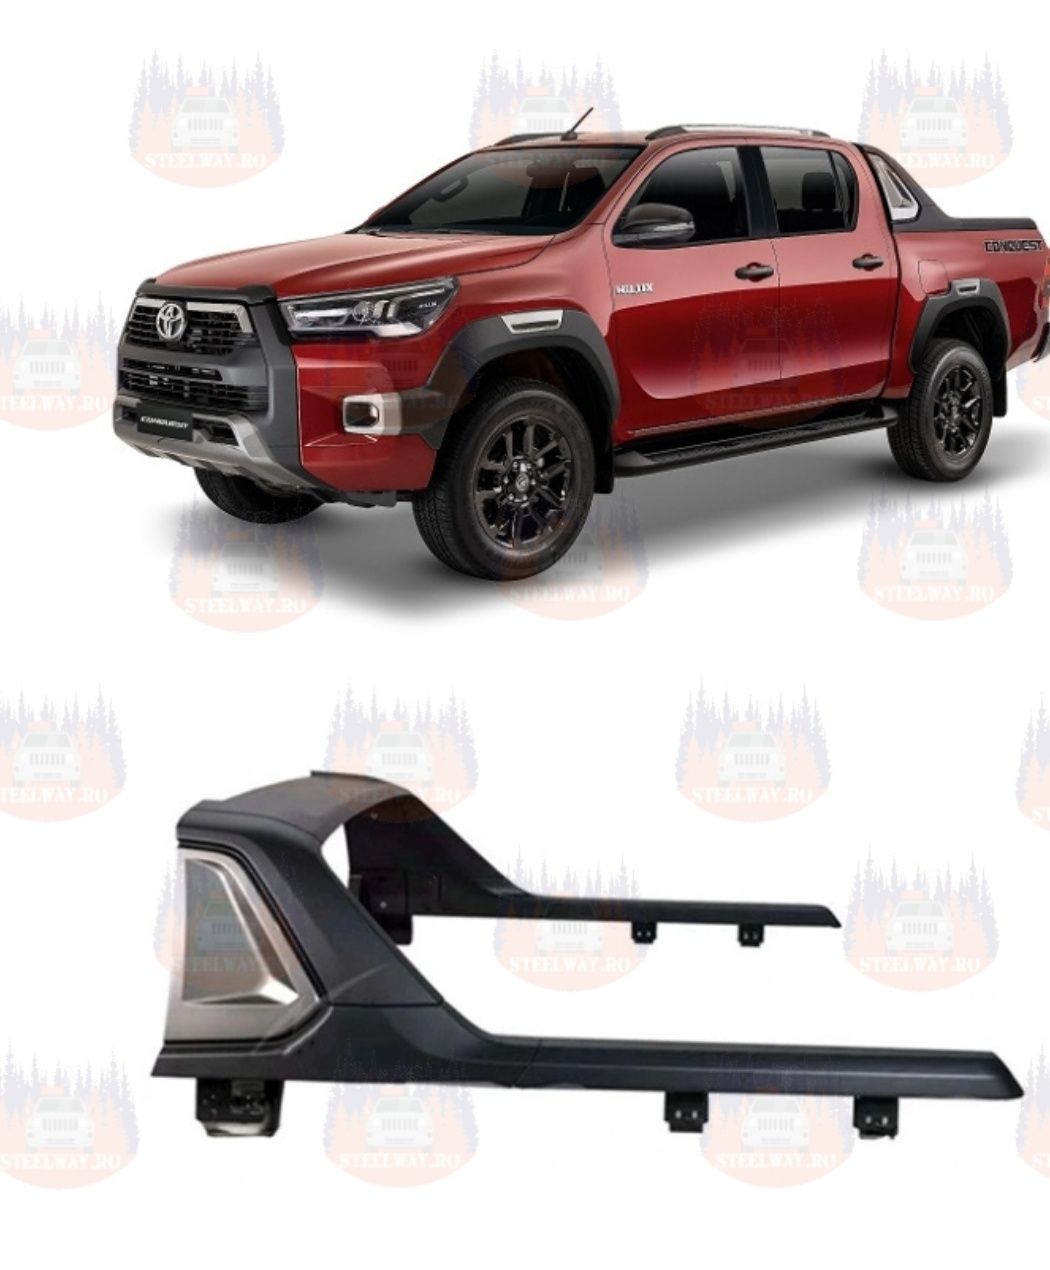 PACHET: Roll bar ABS+ Inchidere bena rulou electric Toyota Hilux 2015+